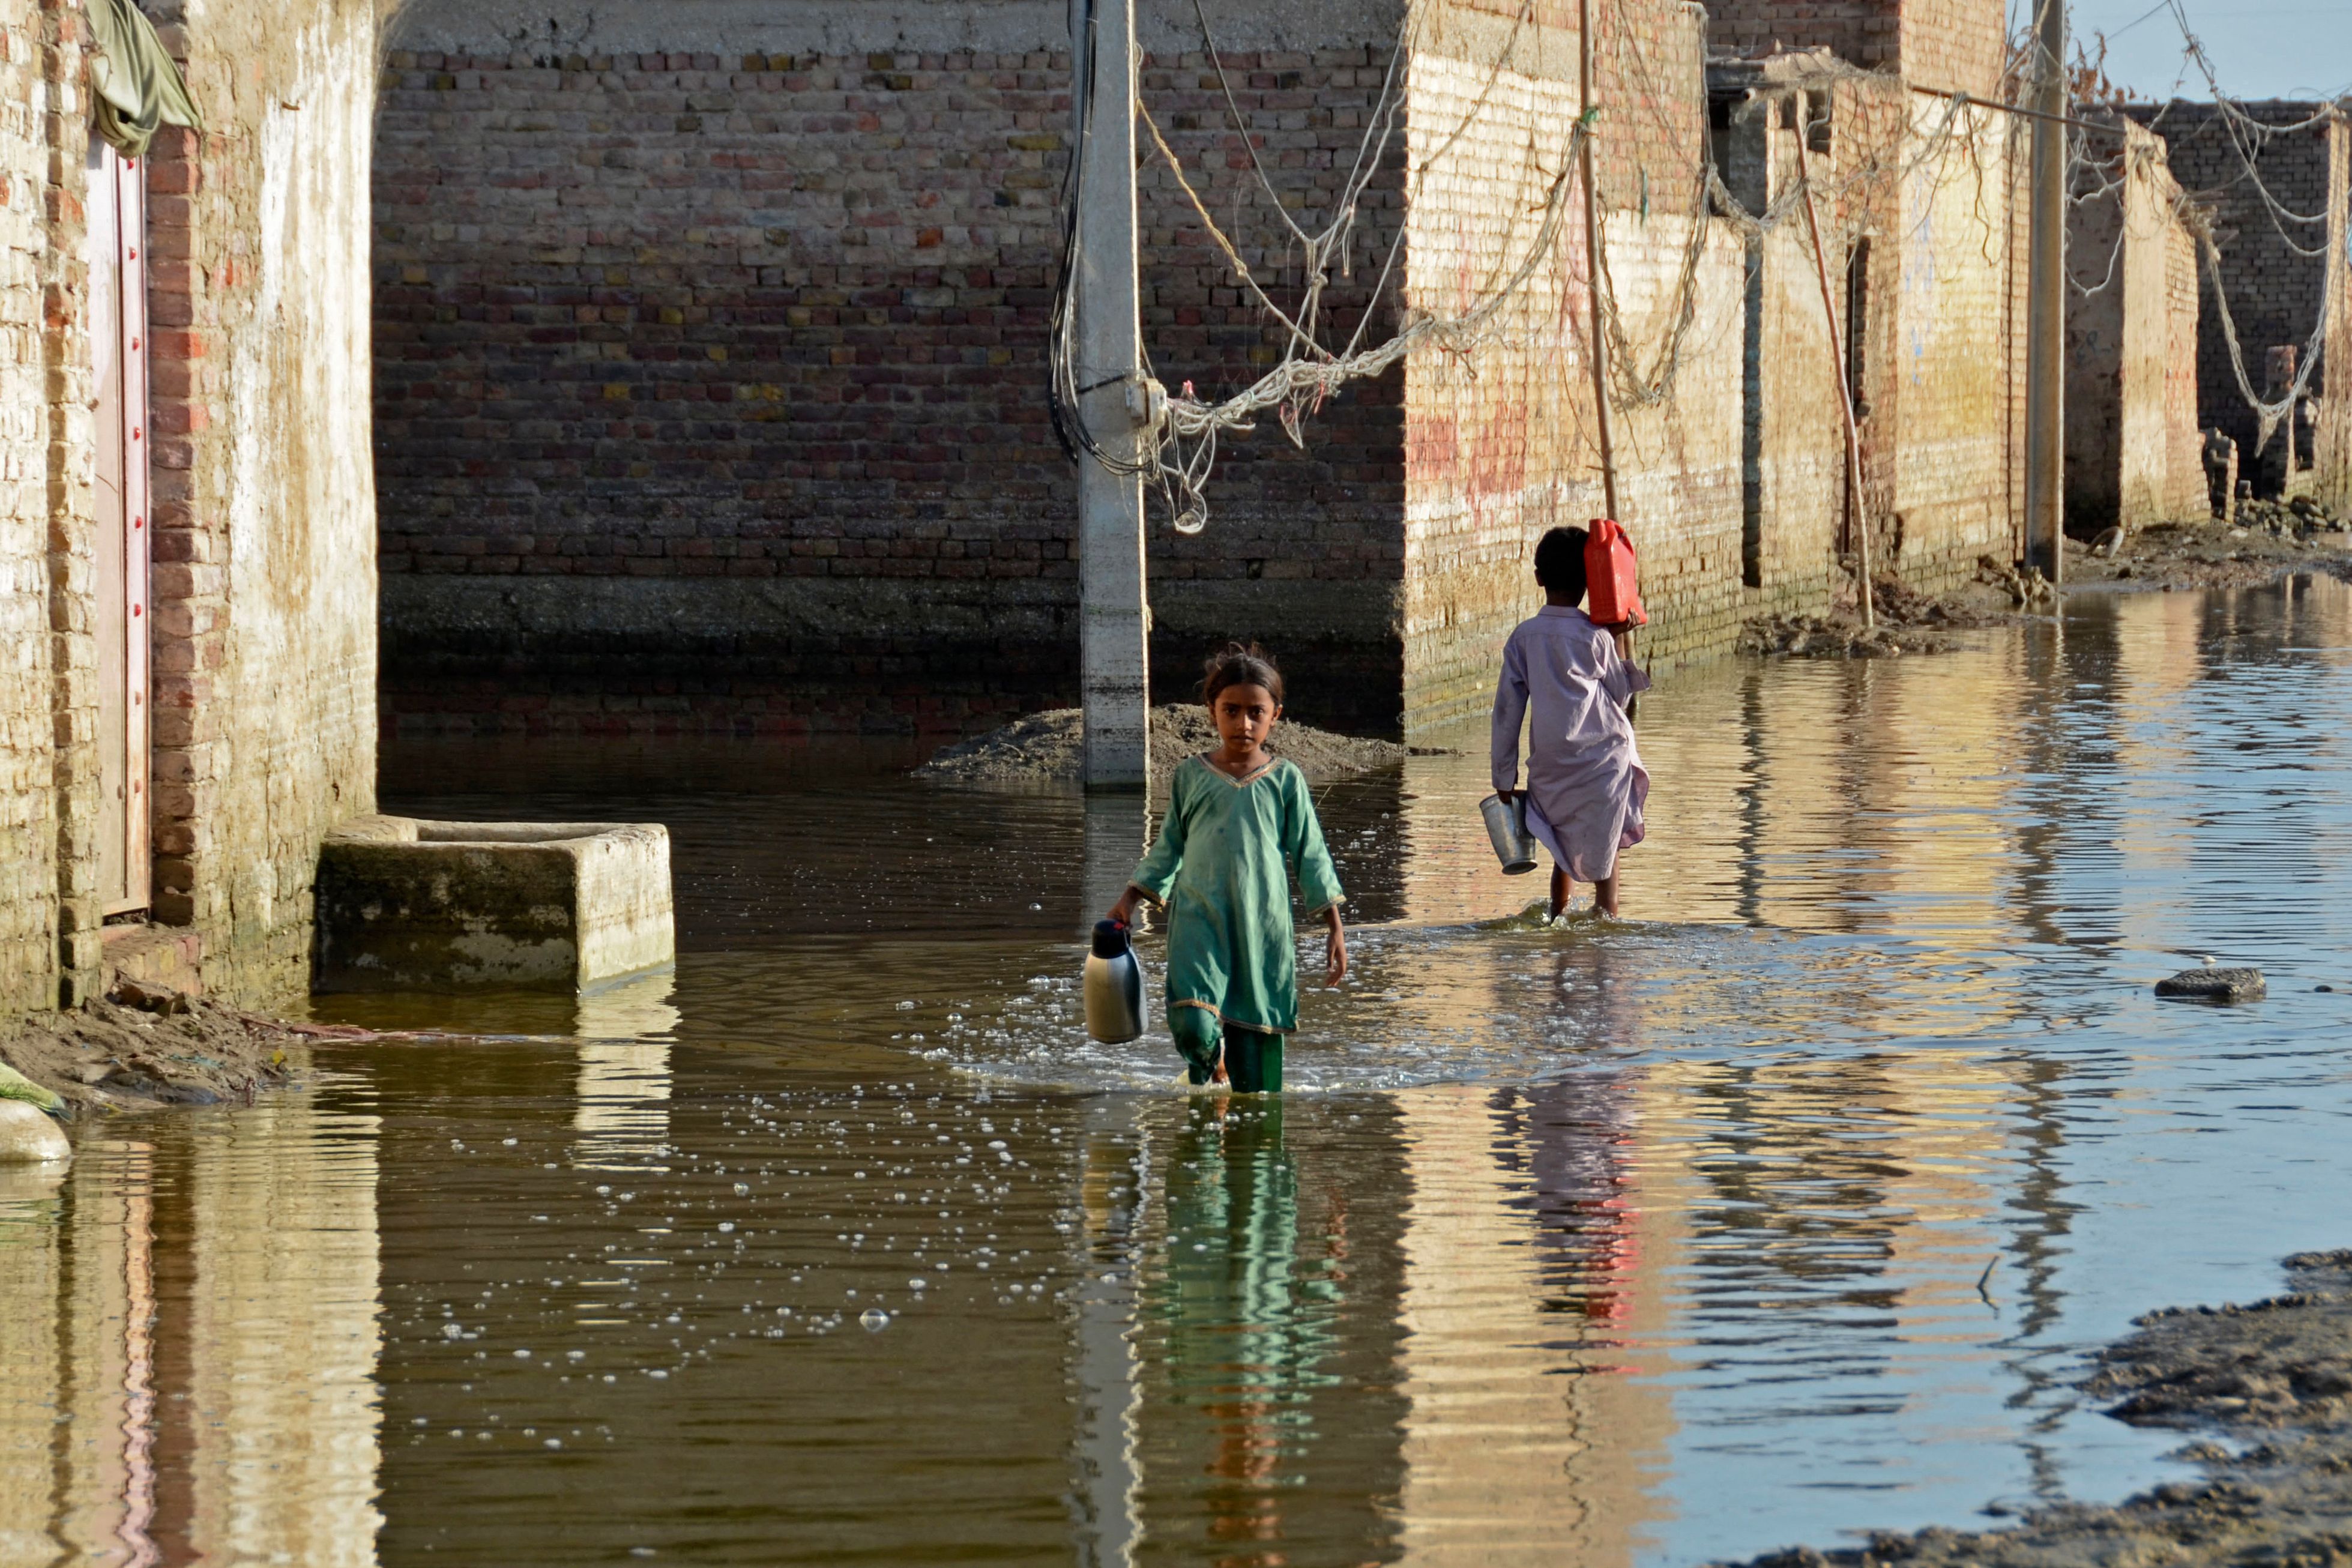 Pakistan has been hit by severe flooding this year